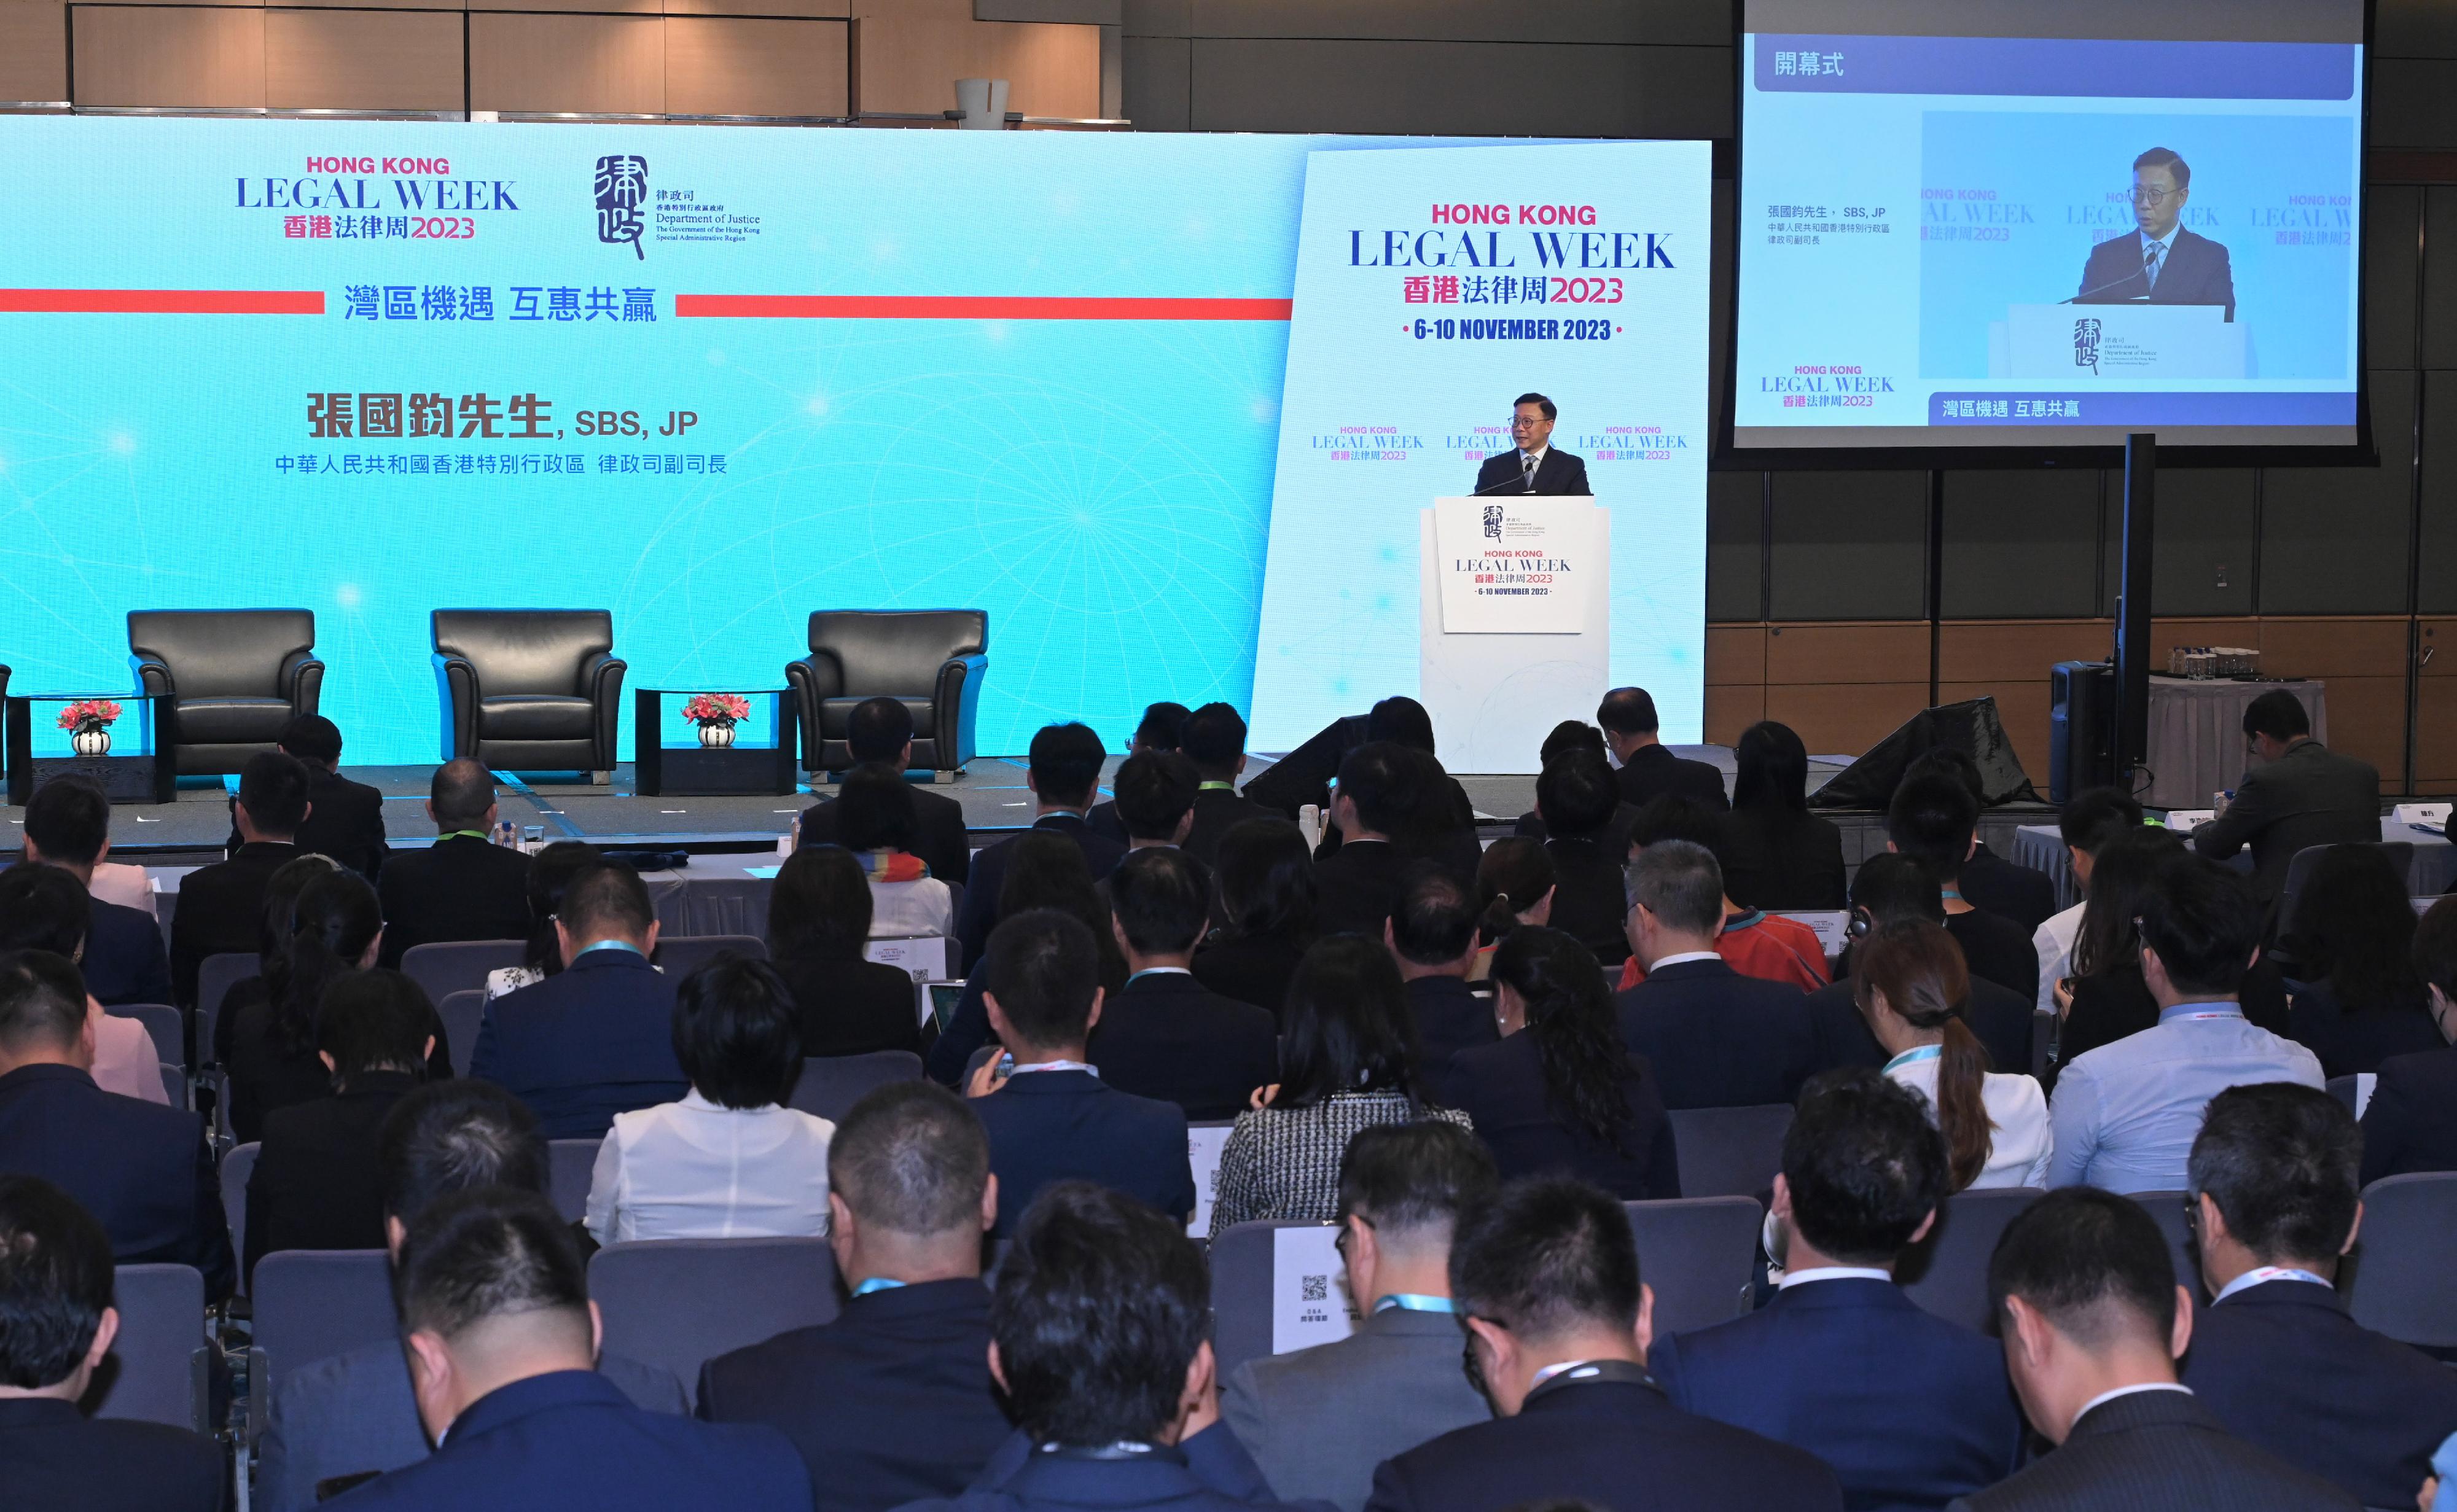 The Deputy Secretary for Justice, Mr Cheung Kwok-kwan, delivers opening remarks at the Gateway to the Opportunities in the GBA under the Hong Kong Legal Week 2023 today (November 9).
